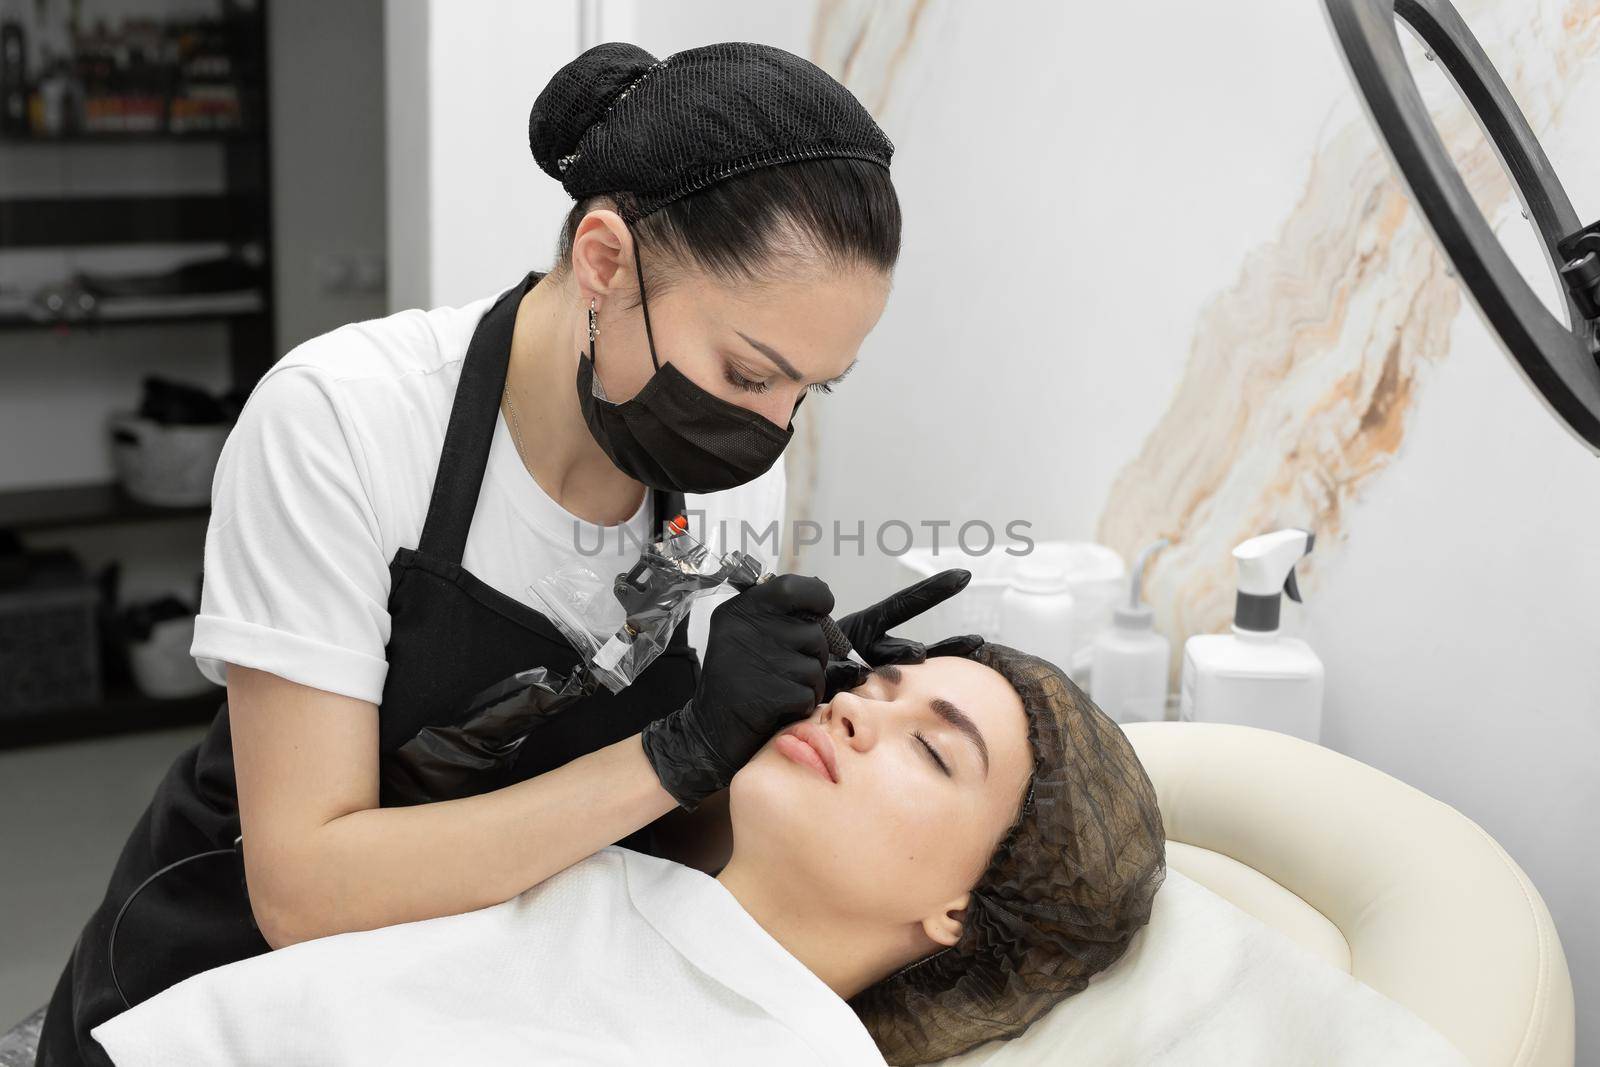 Permanent eyebrow makeup procedure. Eyebrow tattooing, the process in the salon by StudioPeace